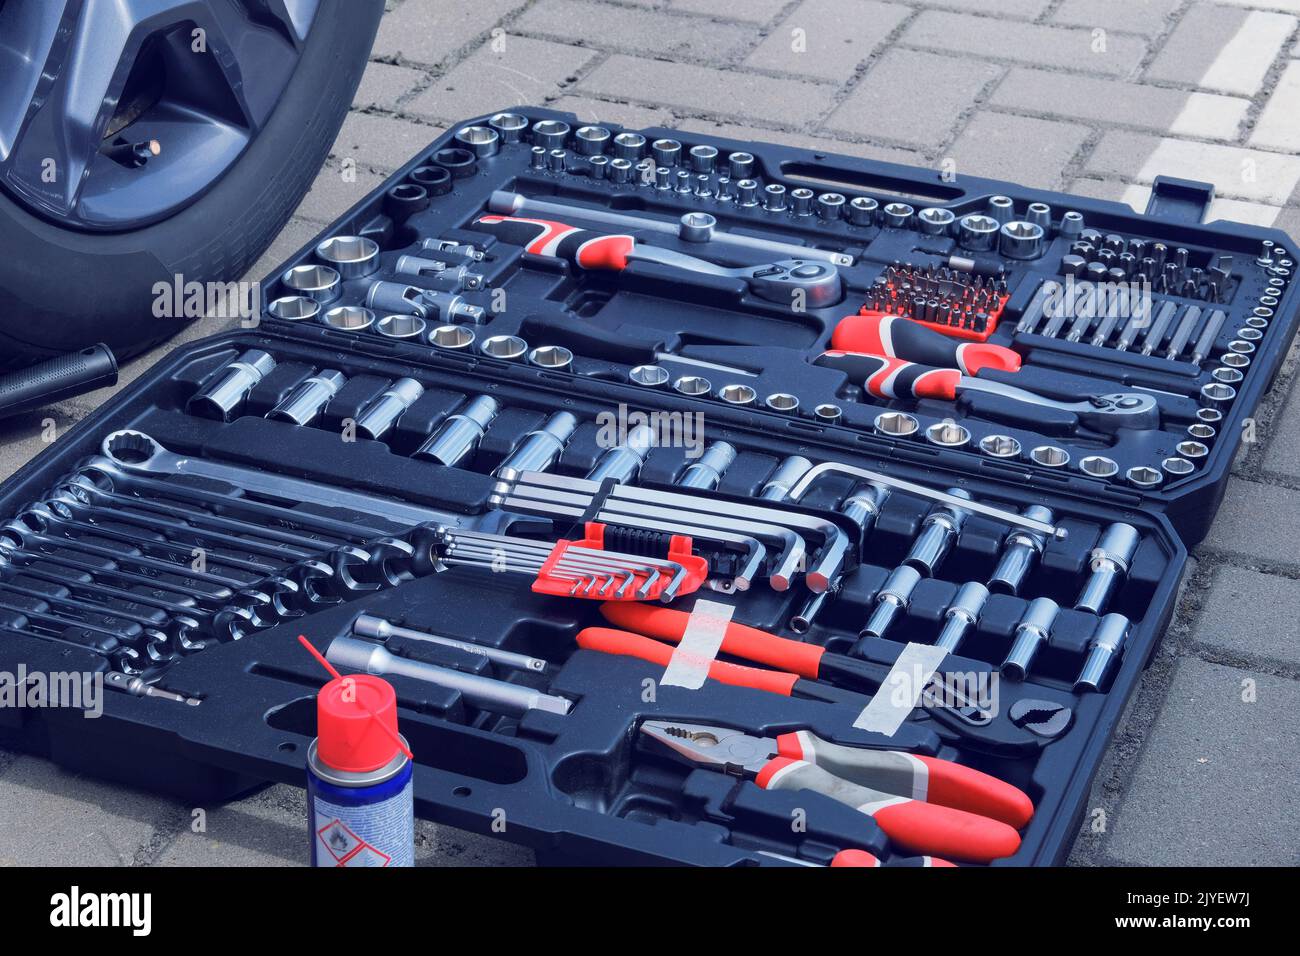 Toolset near the auto. Mechanical workshop tools in box. Using different repair tools for repairing an car. Stock Photo